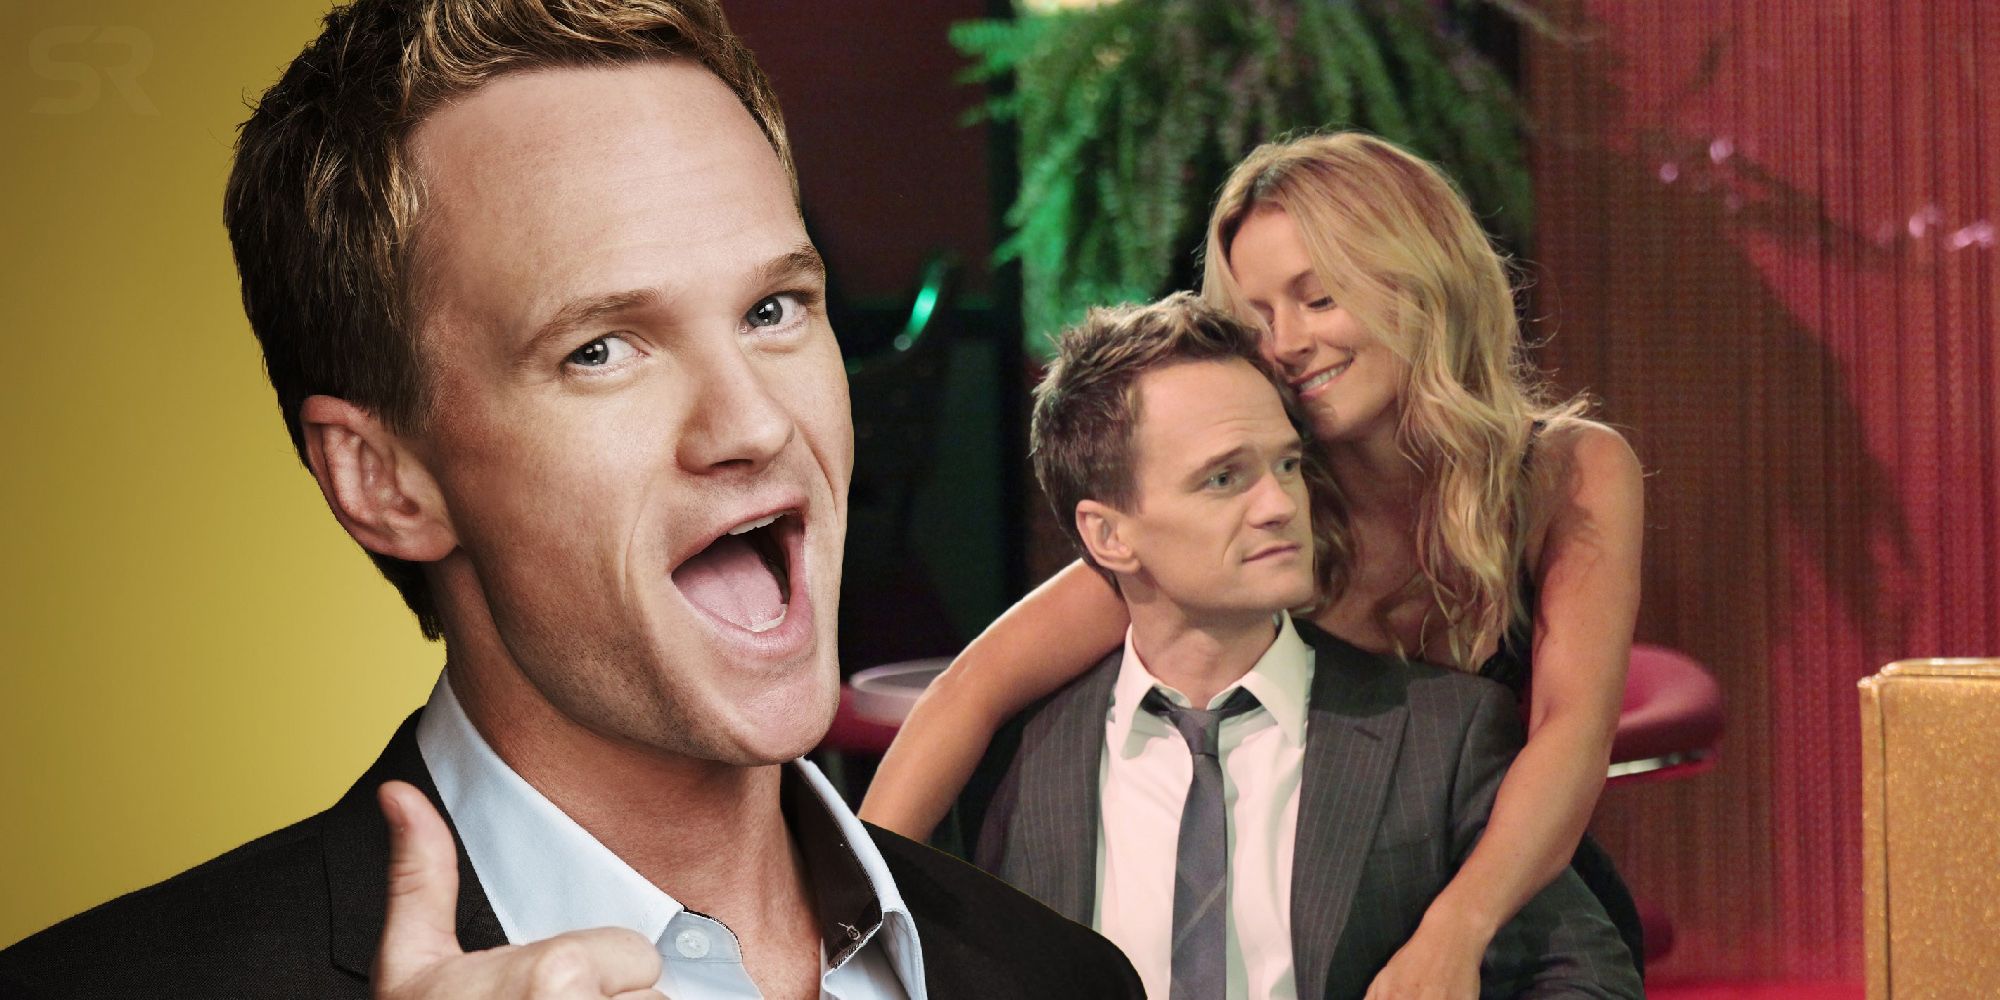 Barney Stinson How i met your mother quinn